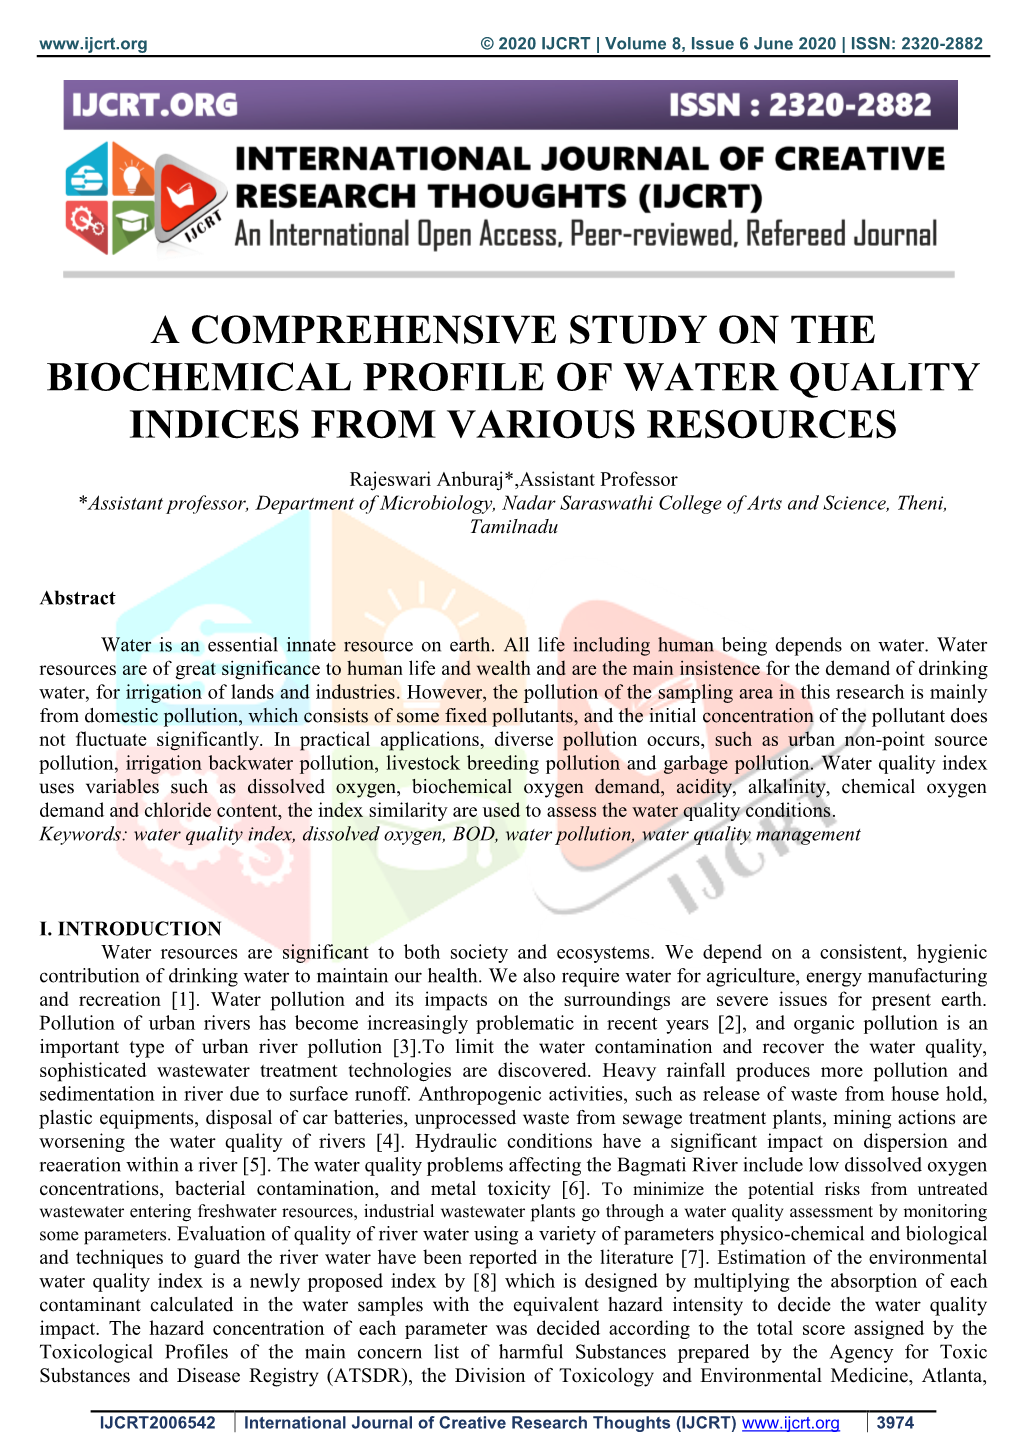 A Comprehensive Study on the Biochemical Profile of Water Quality Indices from Various Resources